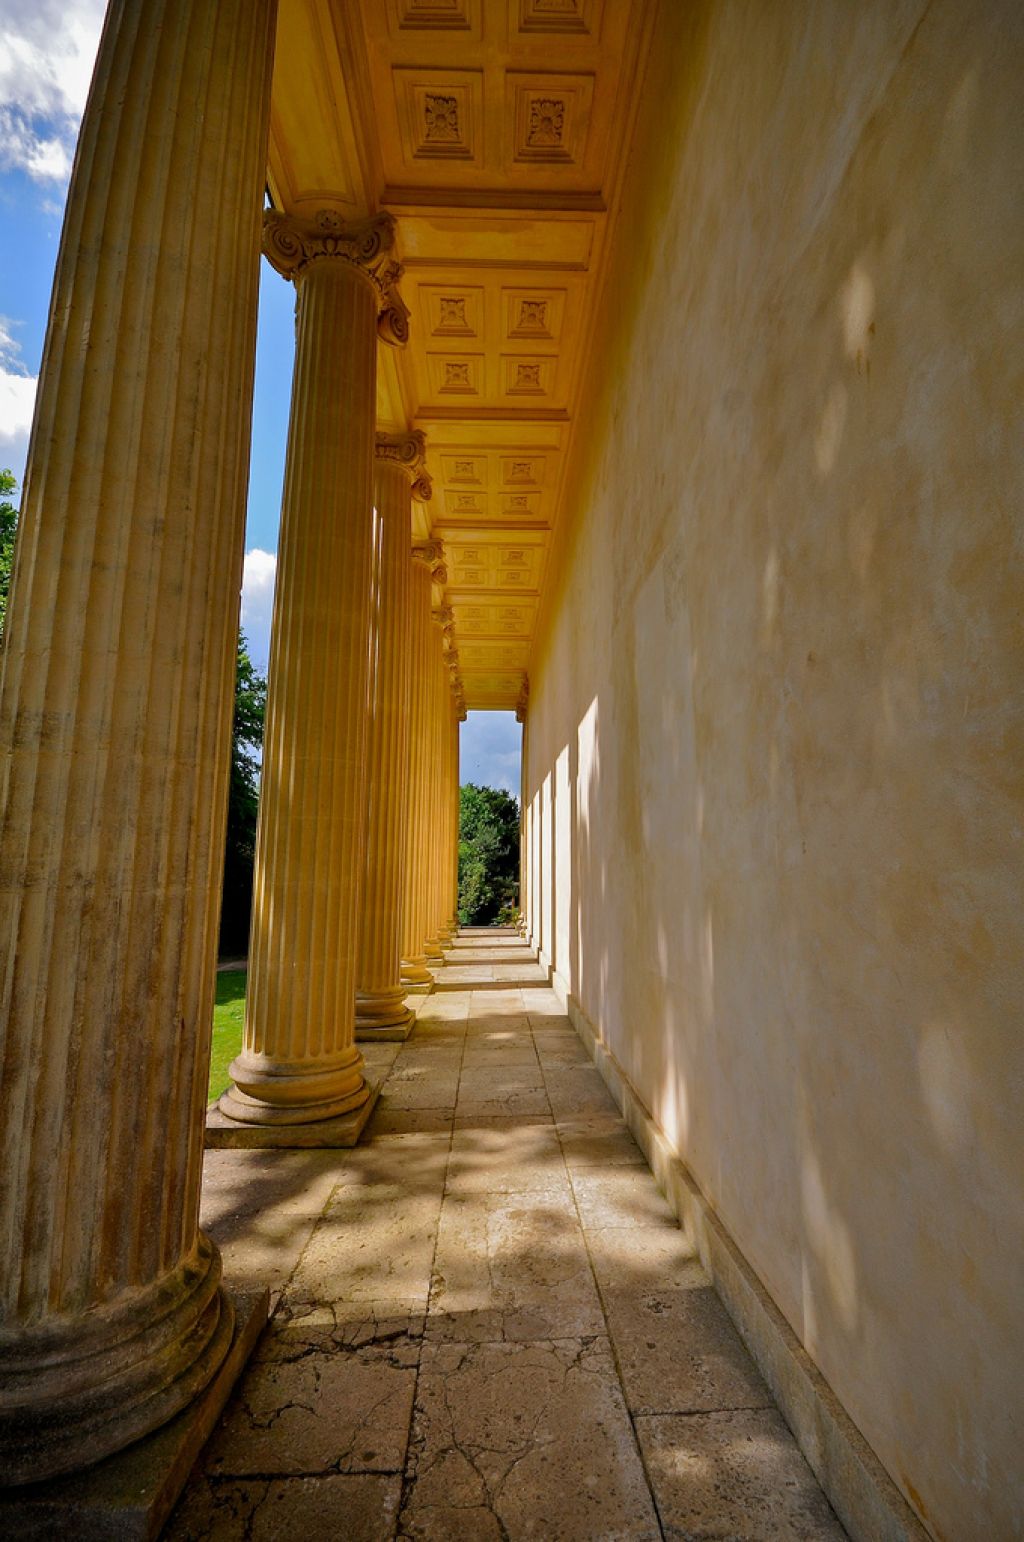 gardens stowe6 The Temple of Concord and Victory at Stowe Park